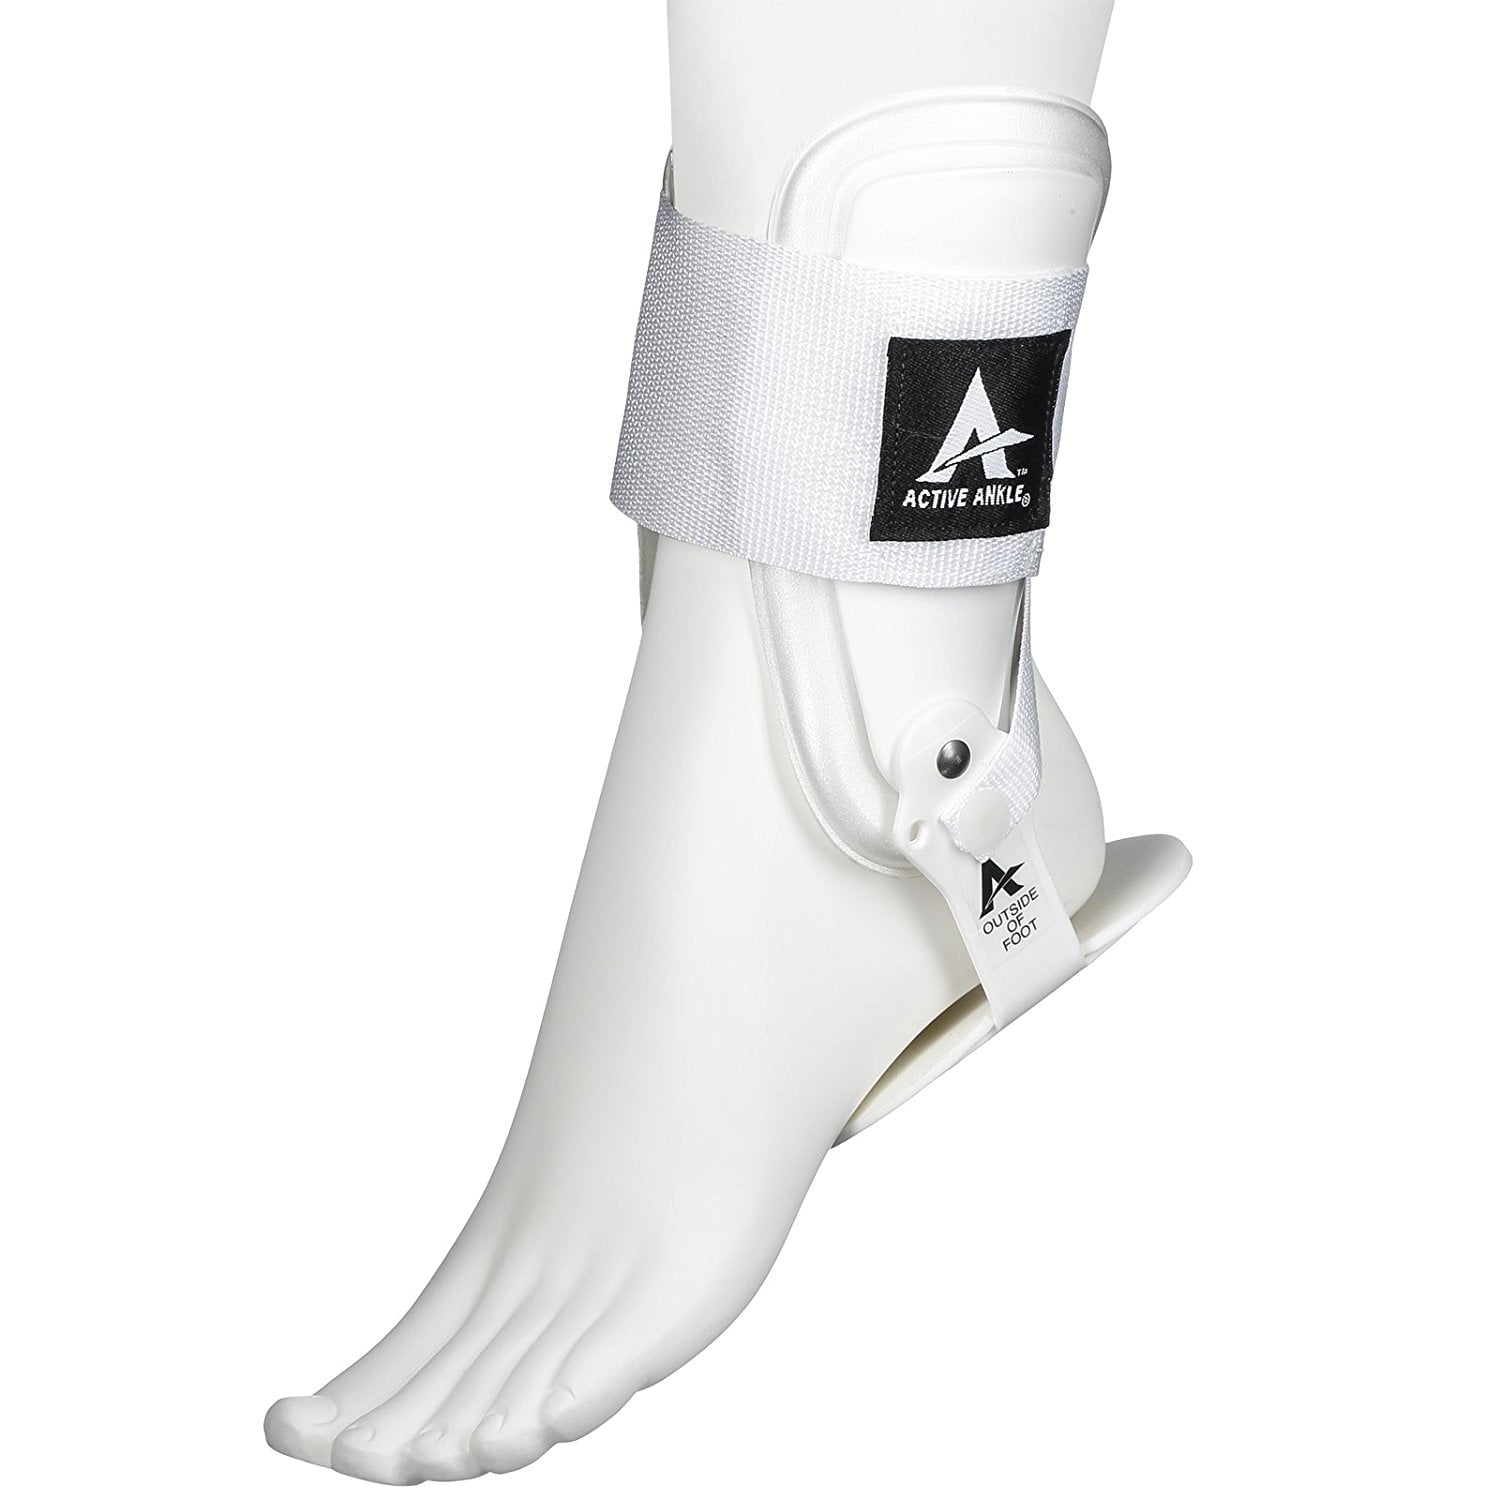 for Any Sports Left - XS/S Volleyball Ankle Braces Orthomen Rigid Ankle Brace for Injured Ankle Protection & Sprain Support Basketball Skiing Baseball